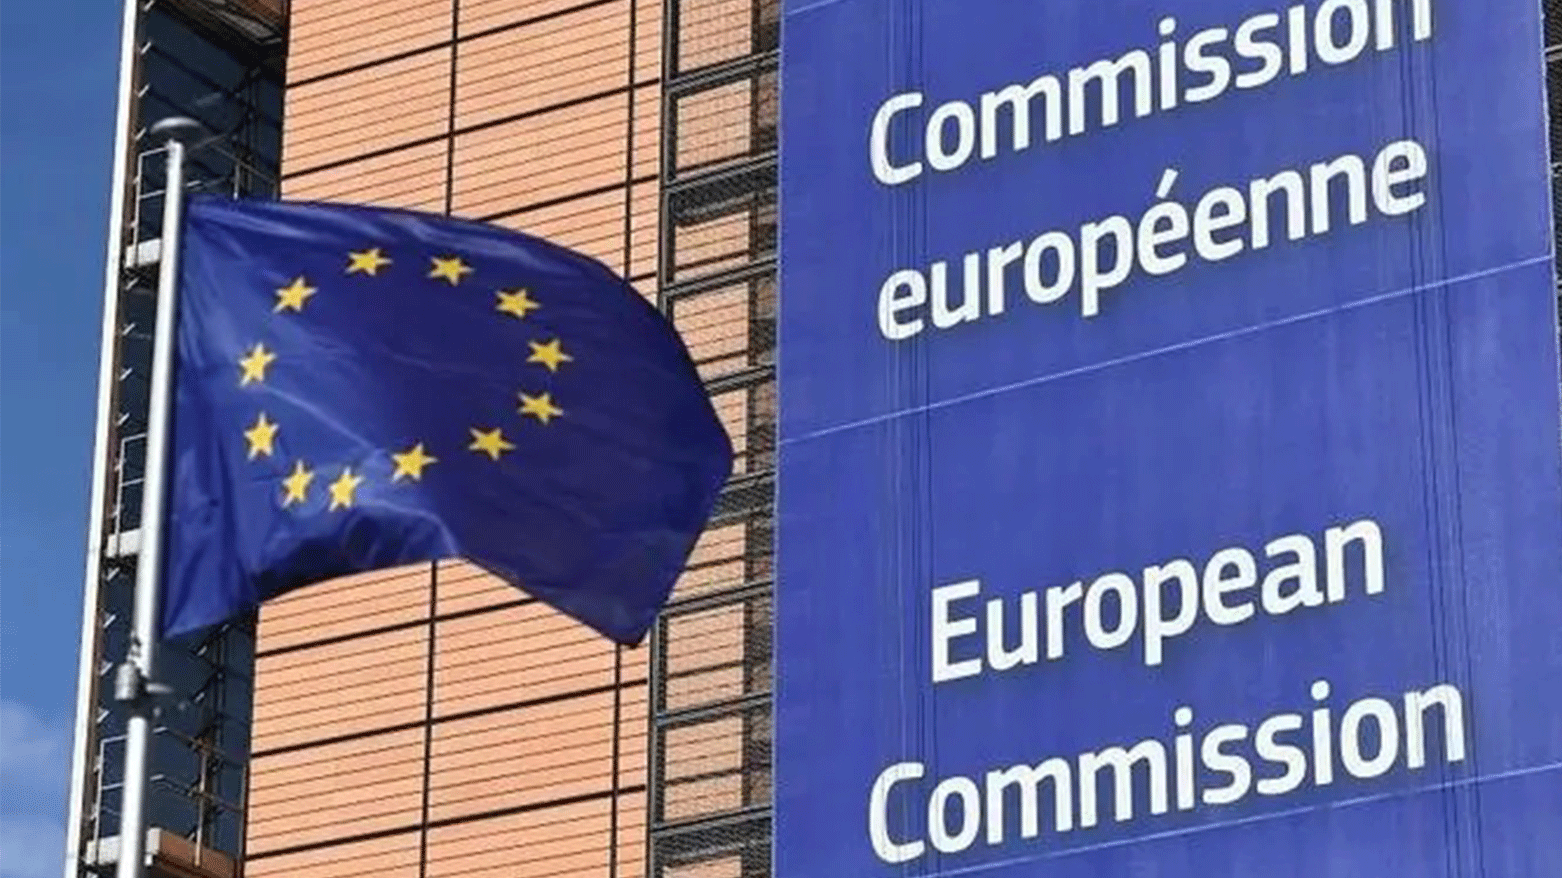 The European Commission insignia and flag. (Photo: AFP)